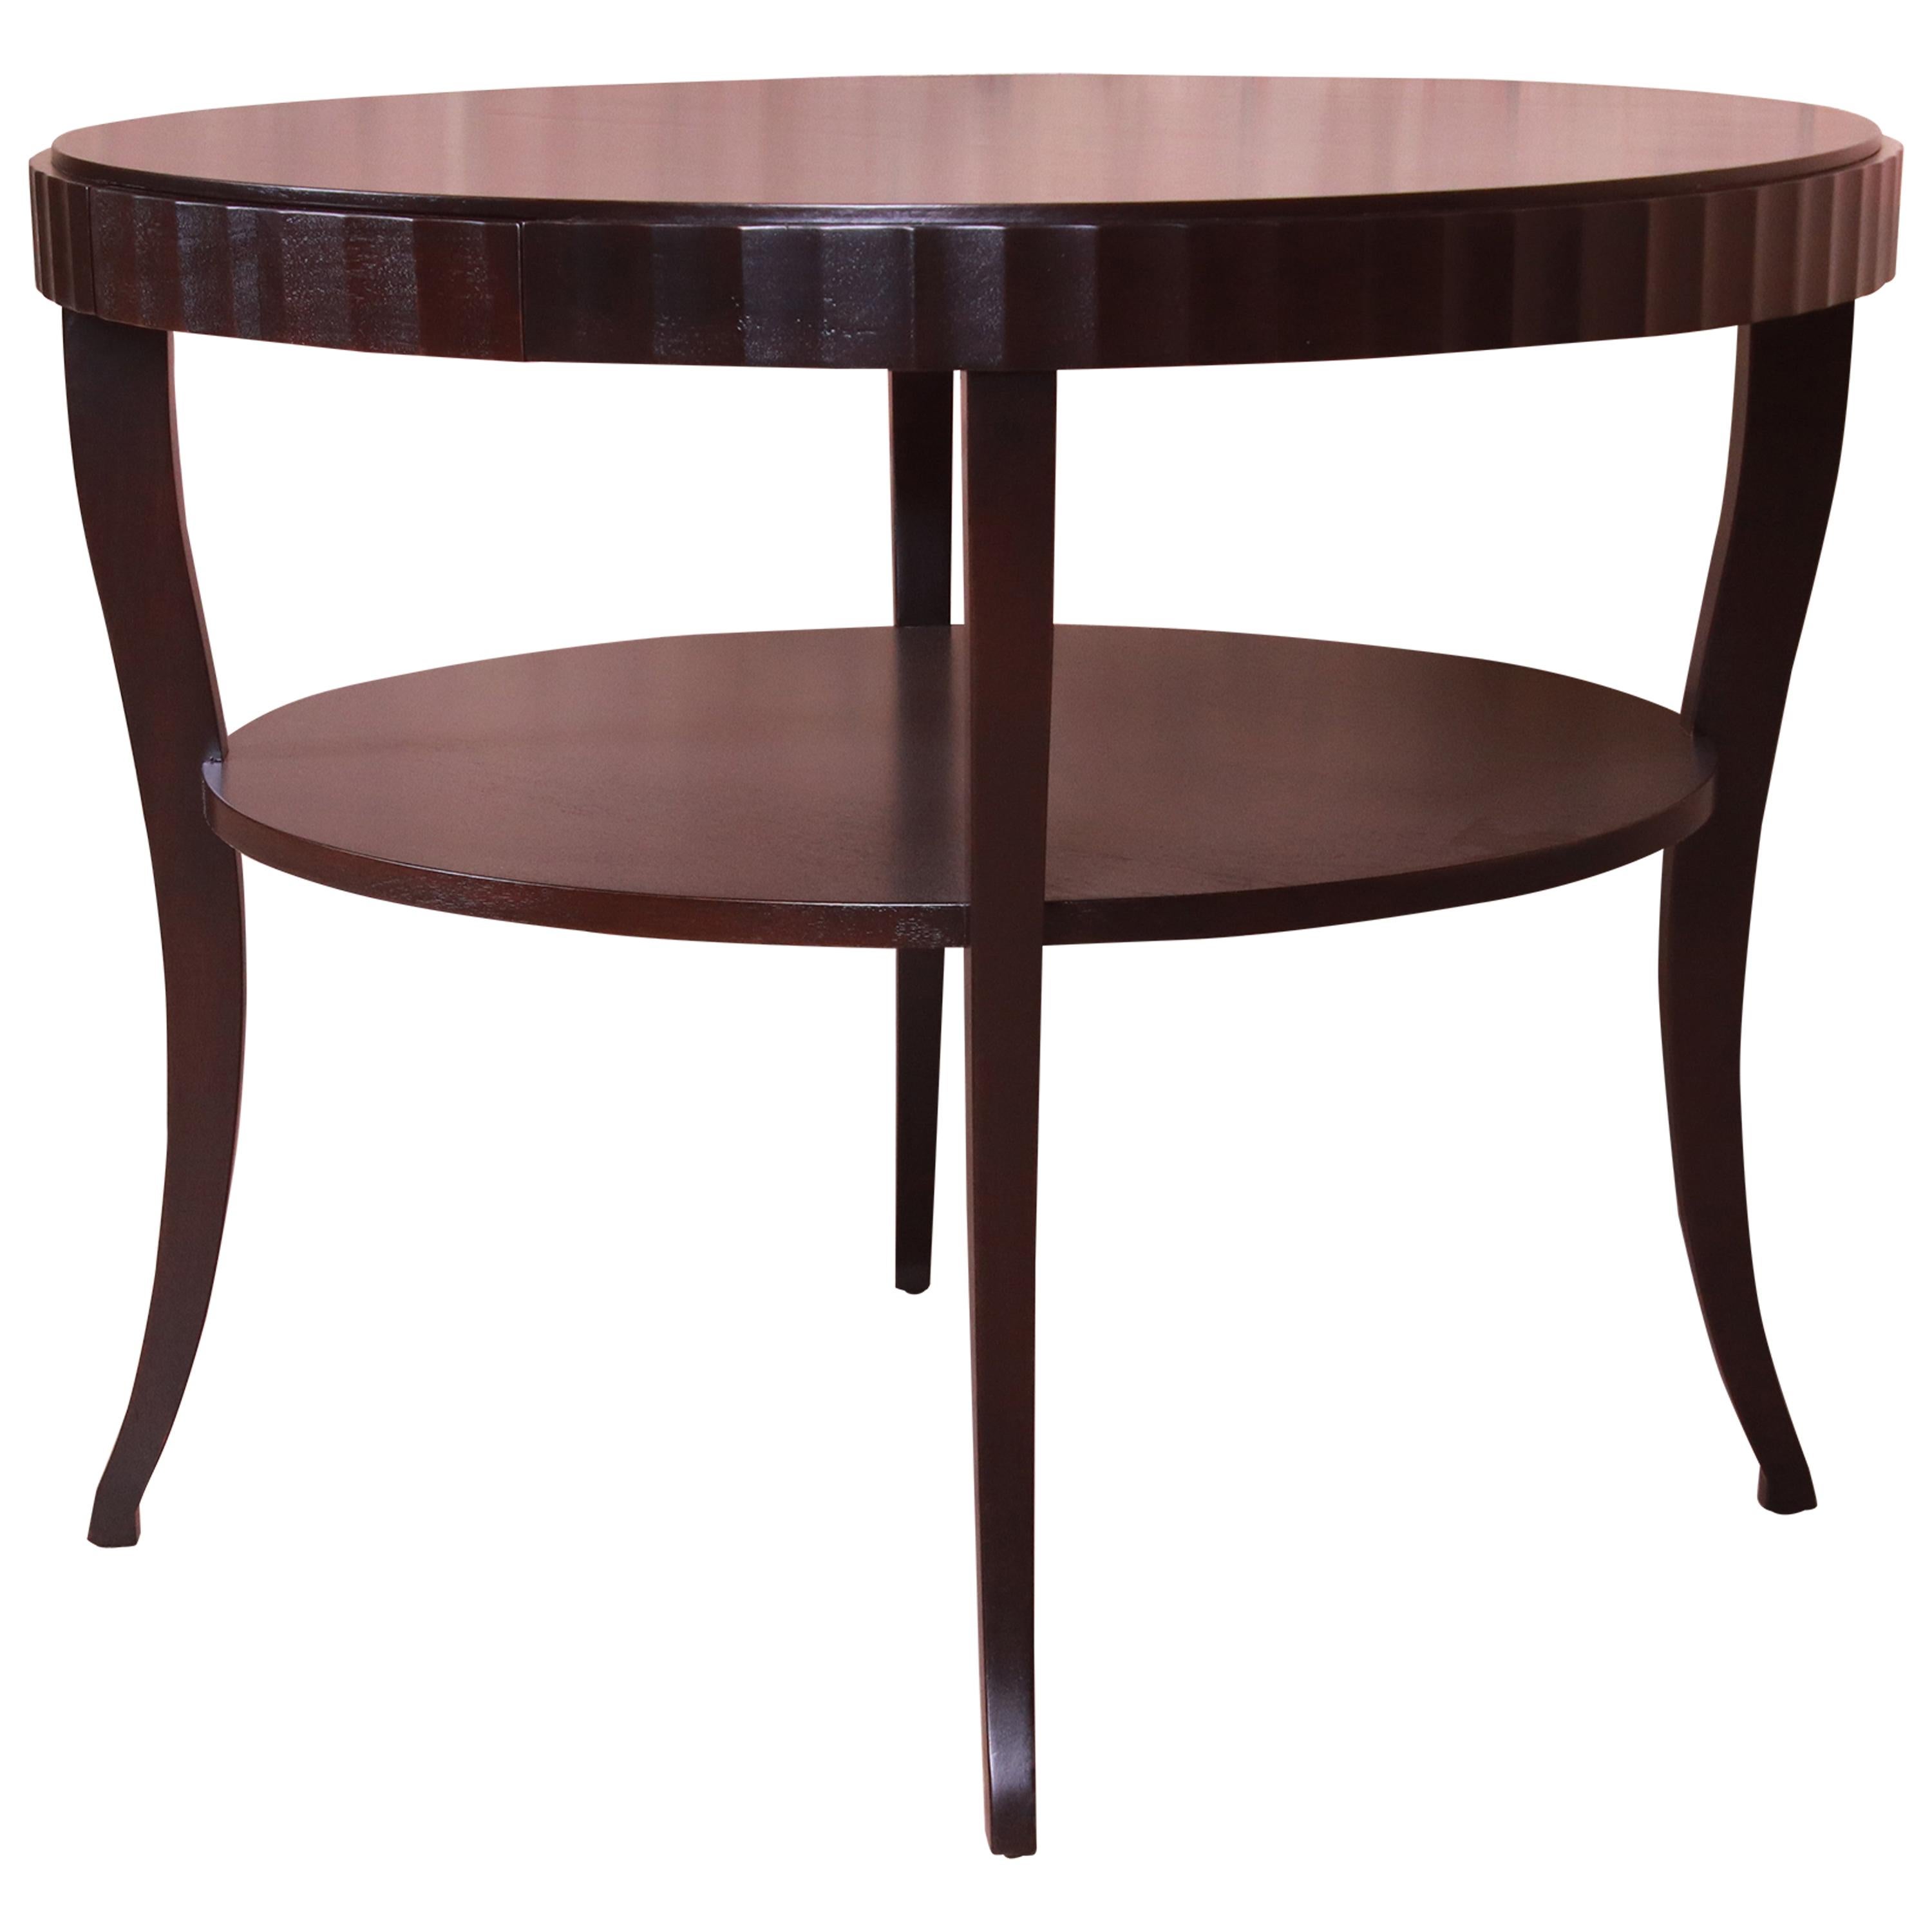 Barbara Barry for Baker Mahogany Two-Tier Center Table, Newly Refinished